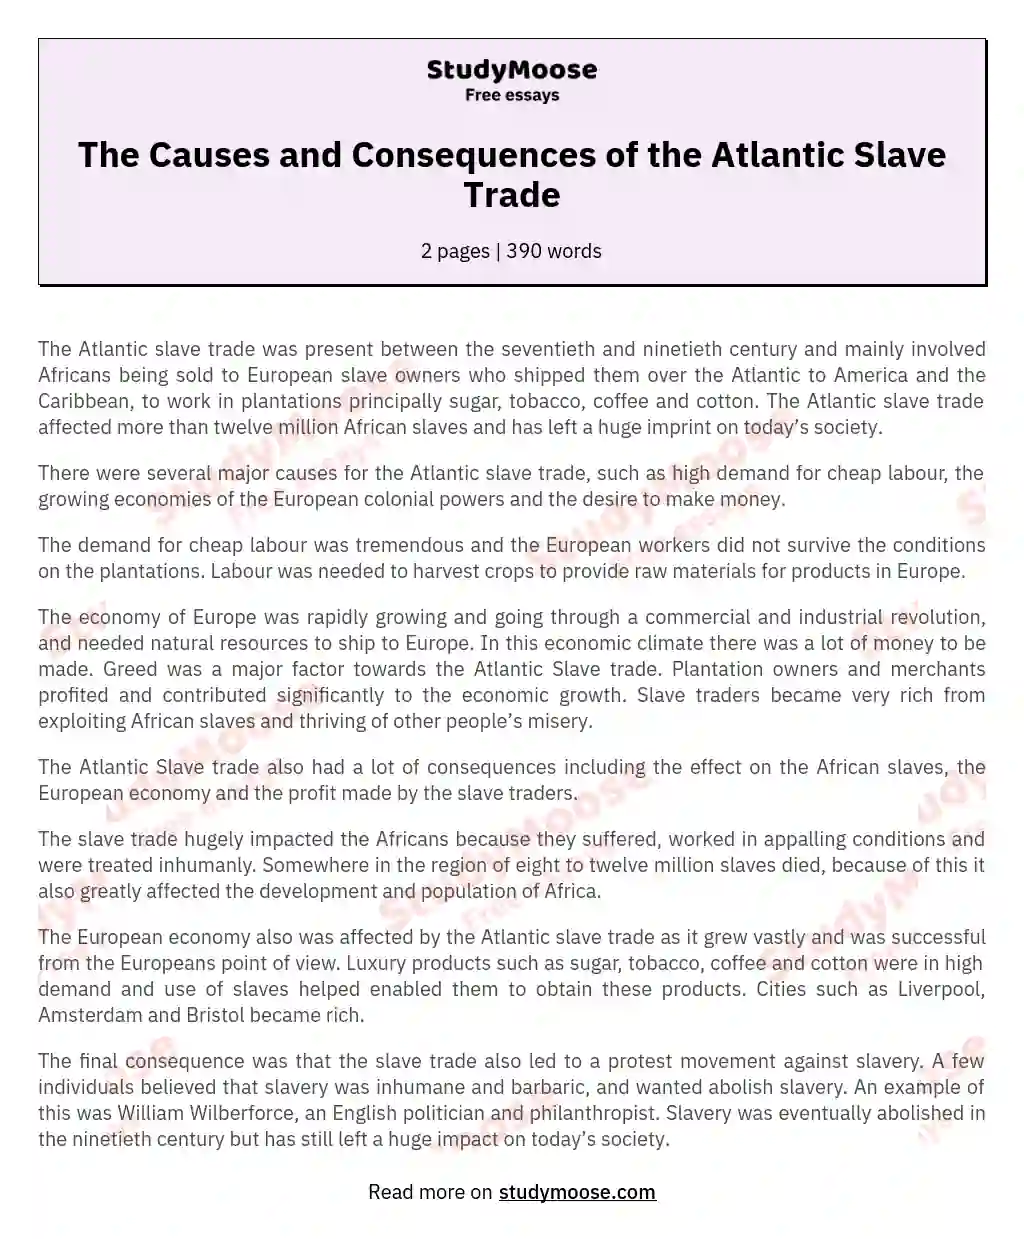 The Causes and Consequences of the Atlantic Slave Trade essay